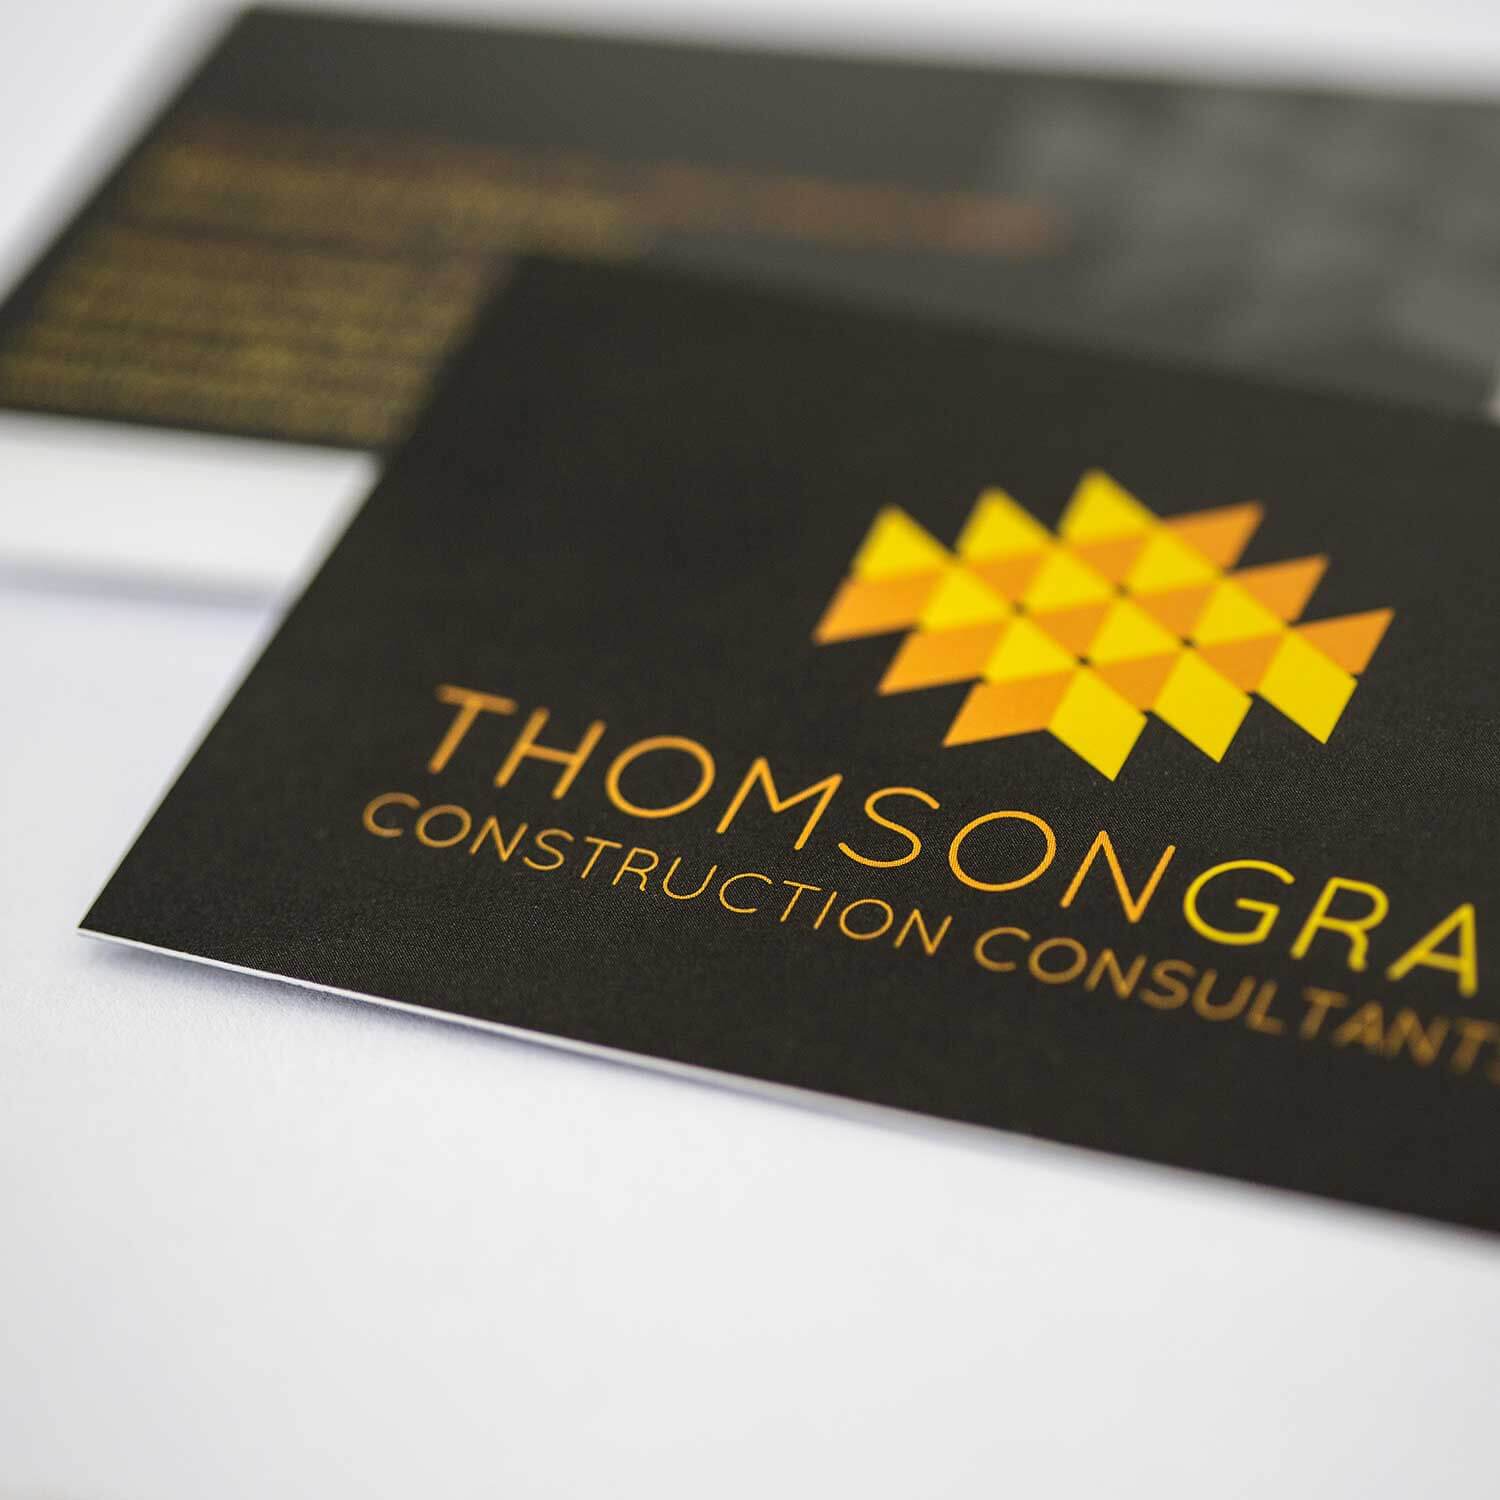 Brand stationery for construction industry marketing